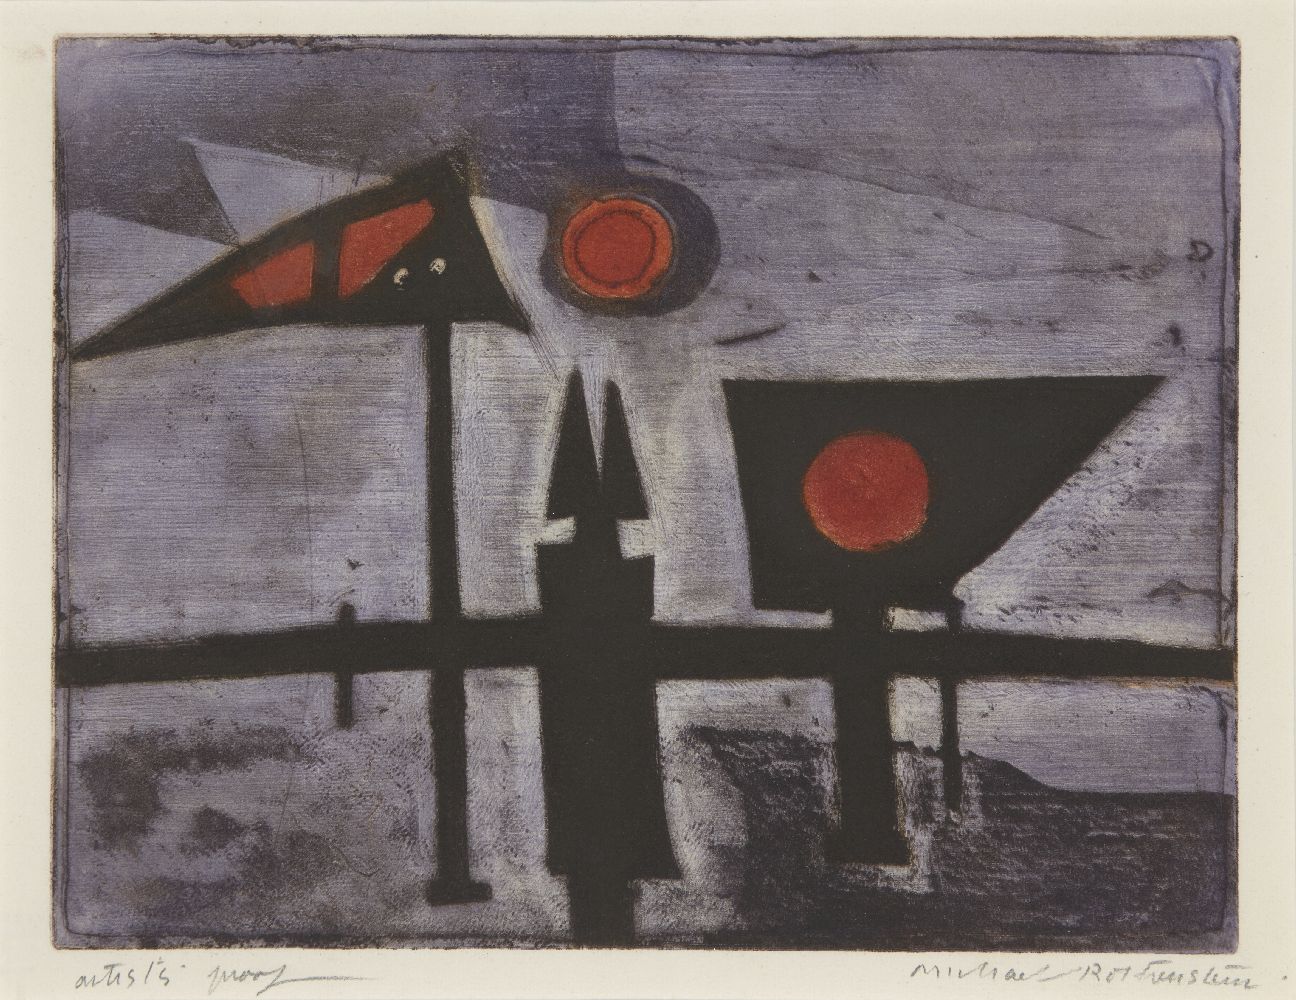 Michael Rothenstein RA, British 1908-1993- Signals, 1953; etching with aquatint in colours on